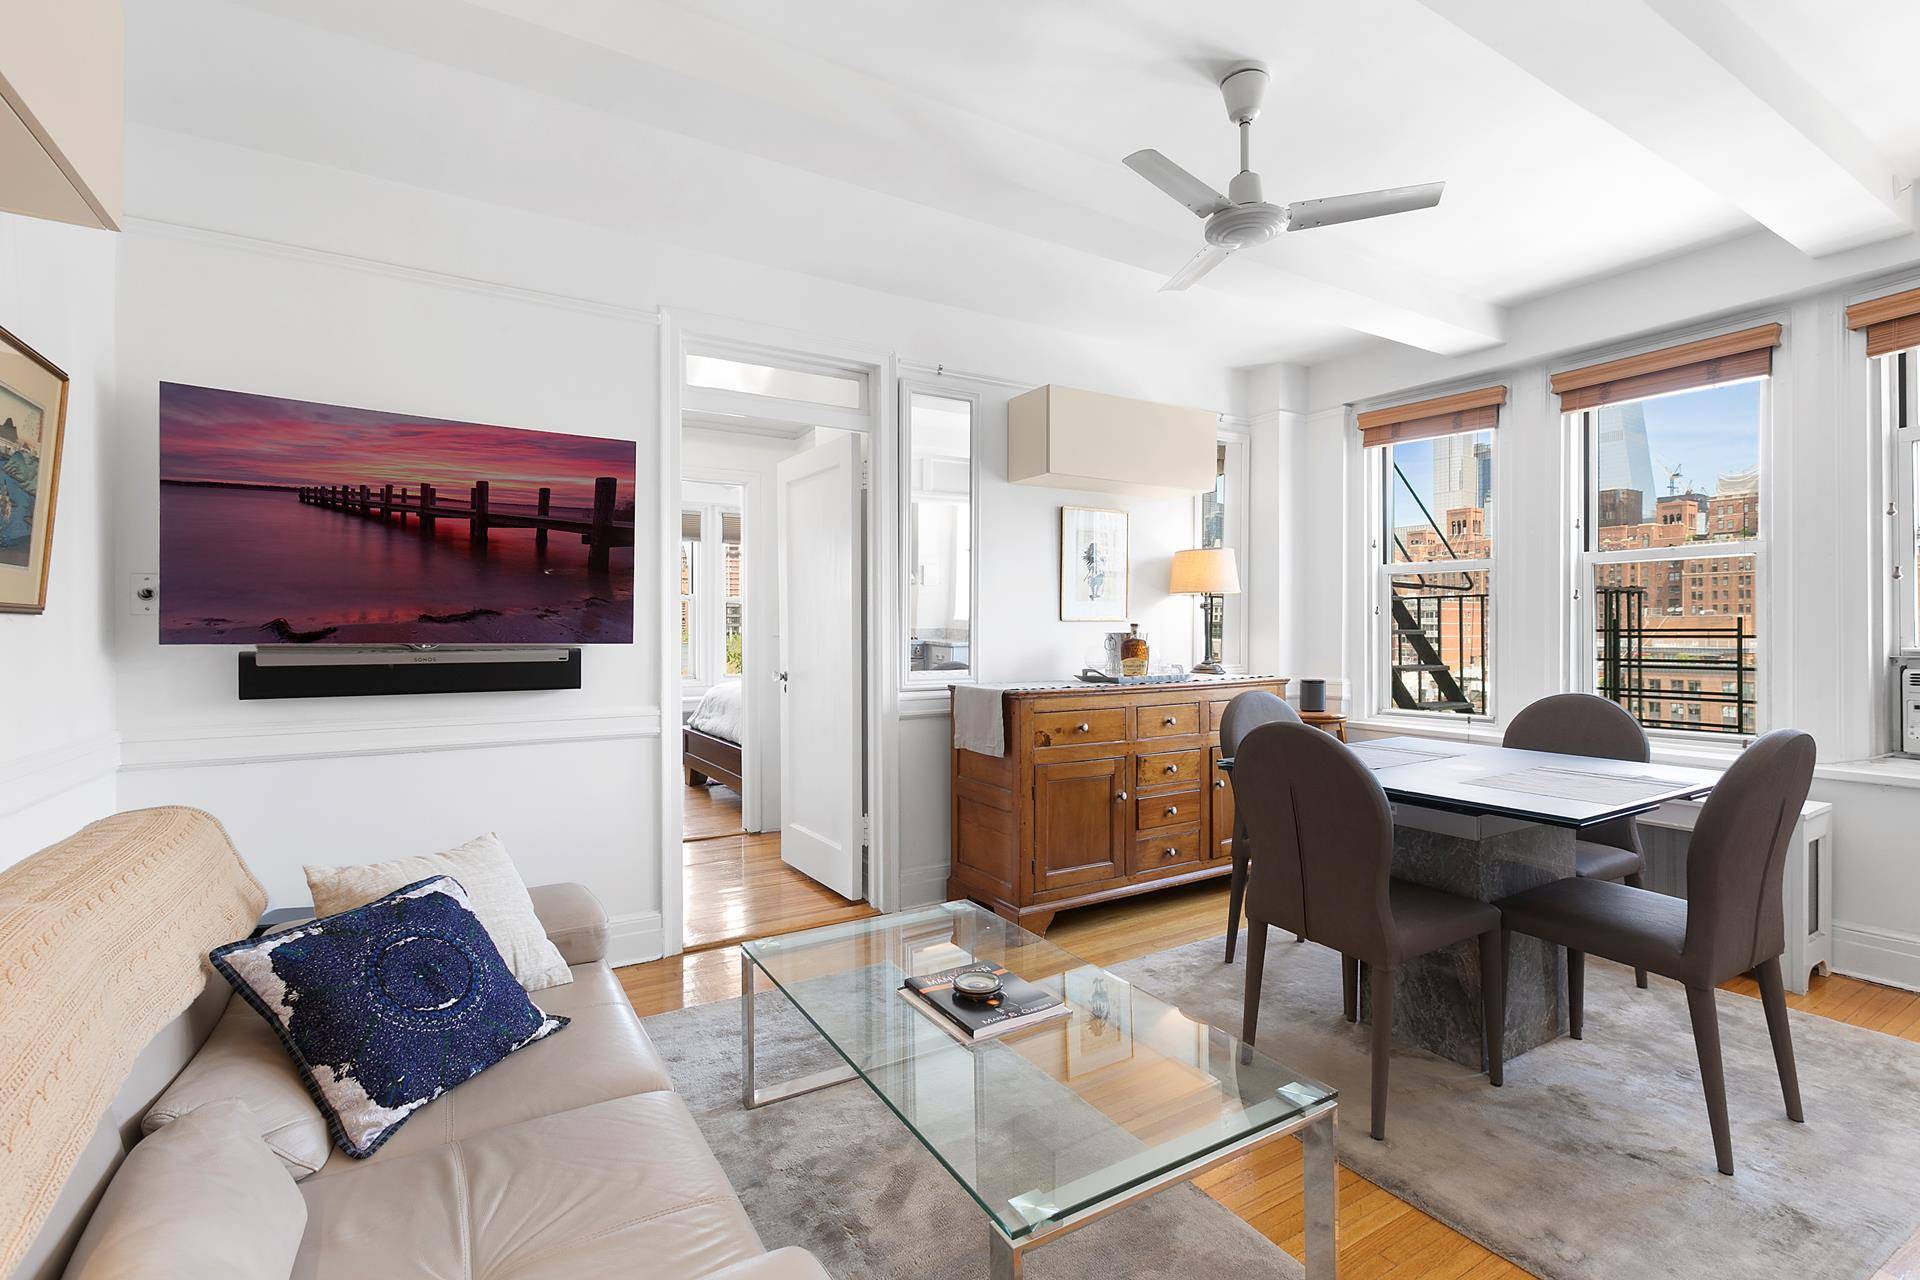 High above landmarked Chelsea is this perfect prewar two bedroom home, newly renovated, with open views and wonderful light.